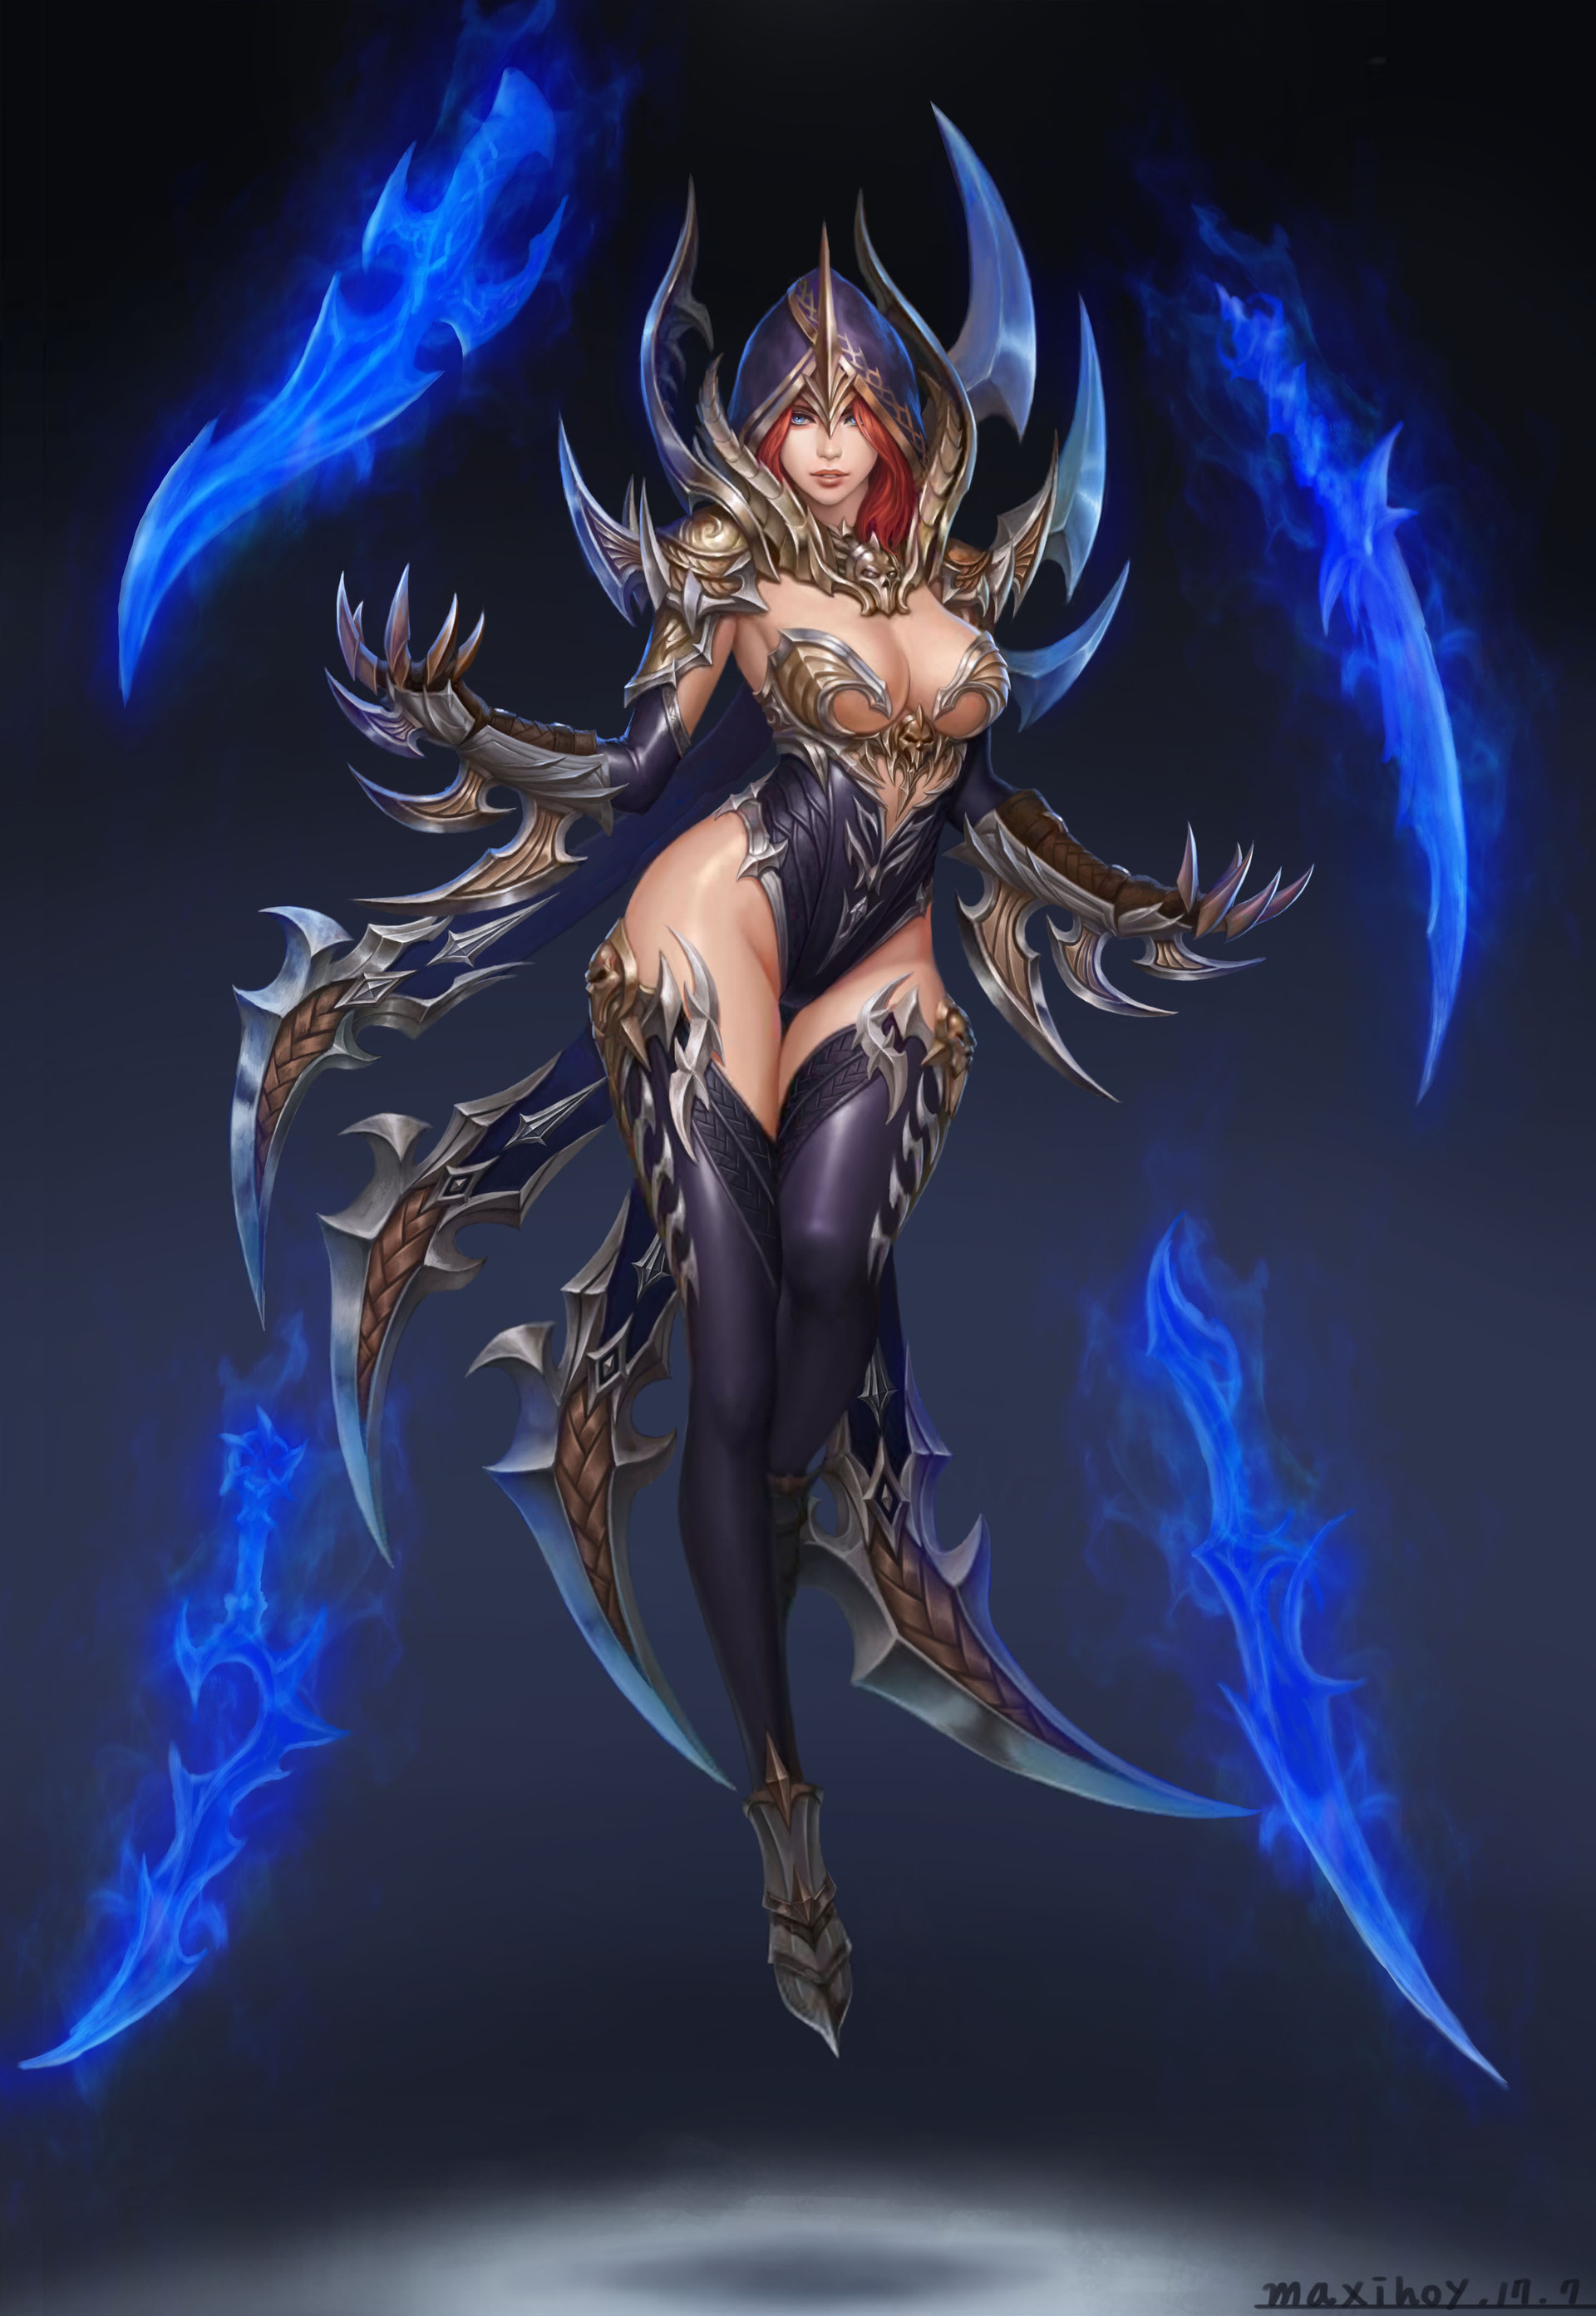 General 1920x2786 Maxi Hoy women hoods blades spikes redhead floating magician spell weapon skimpy clothes armor digital art portrait display watermarked